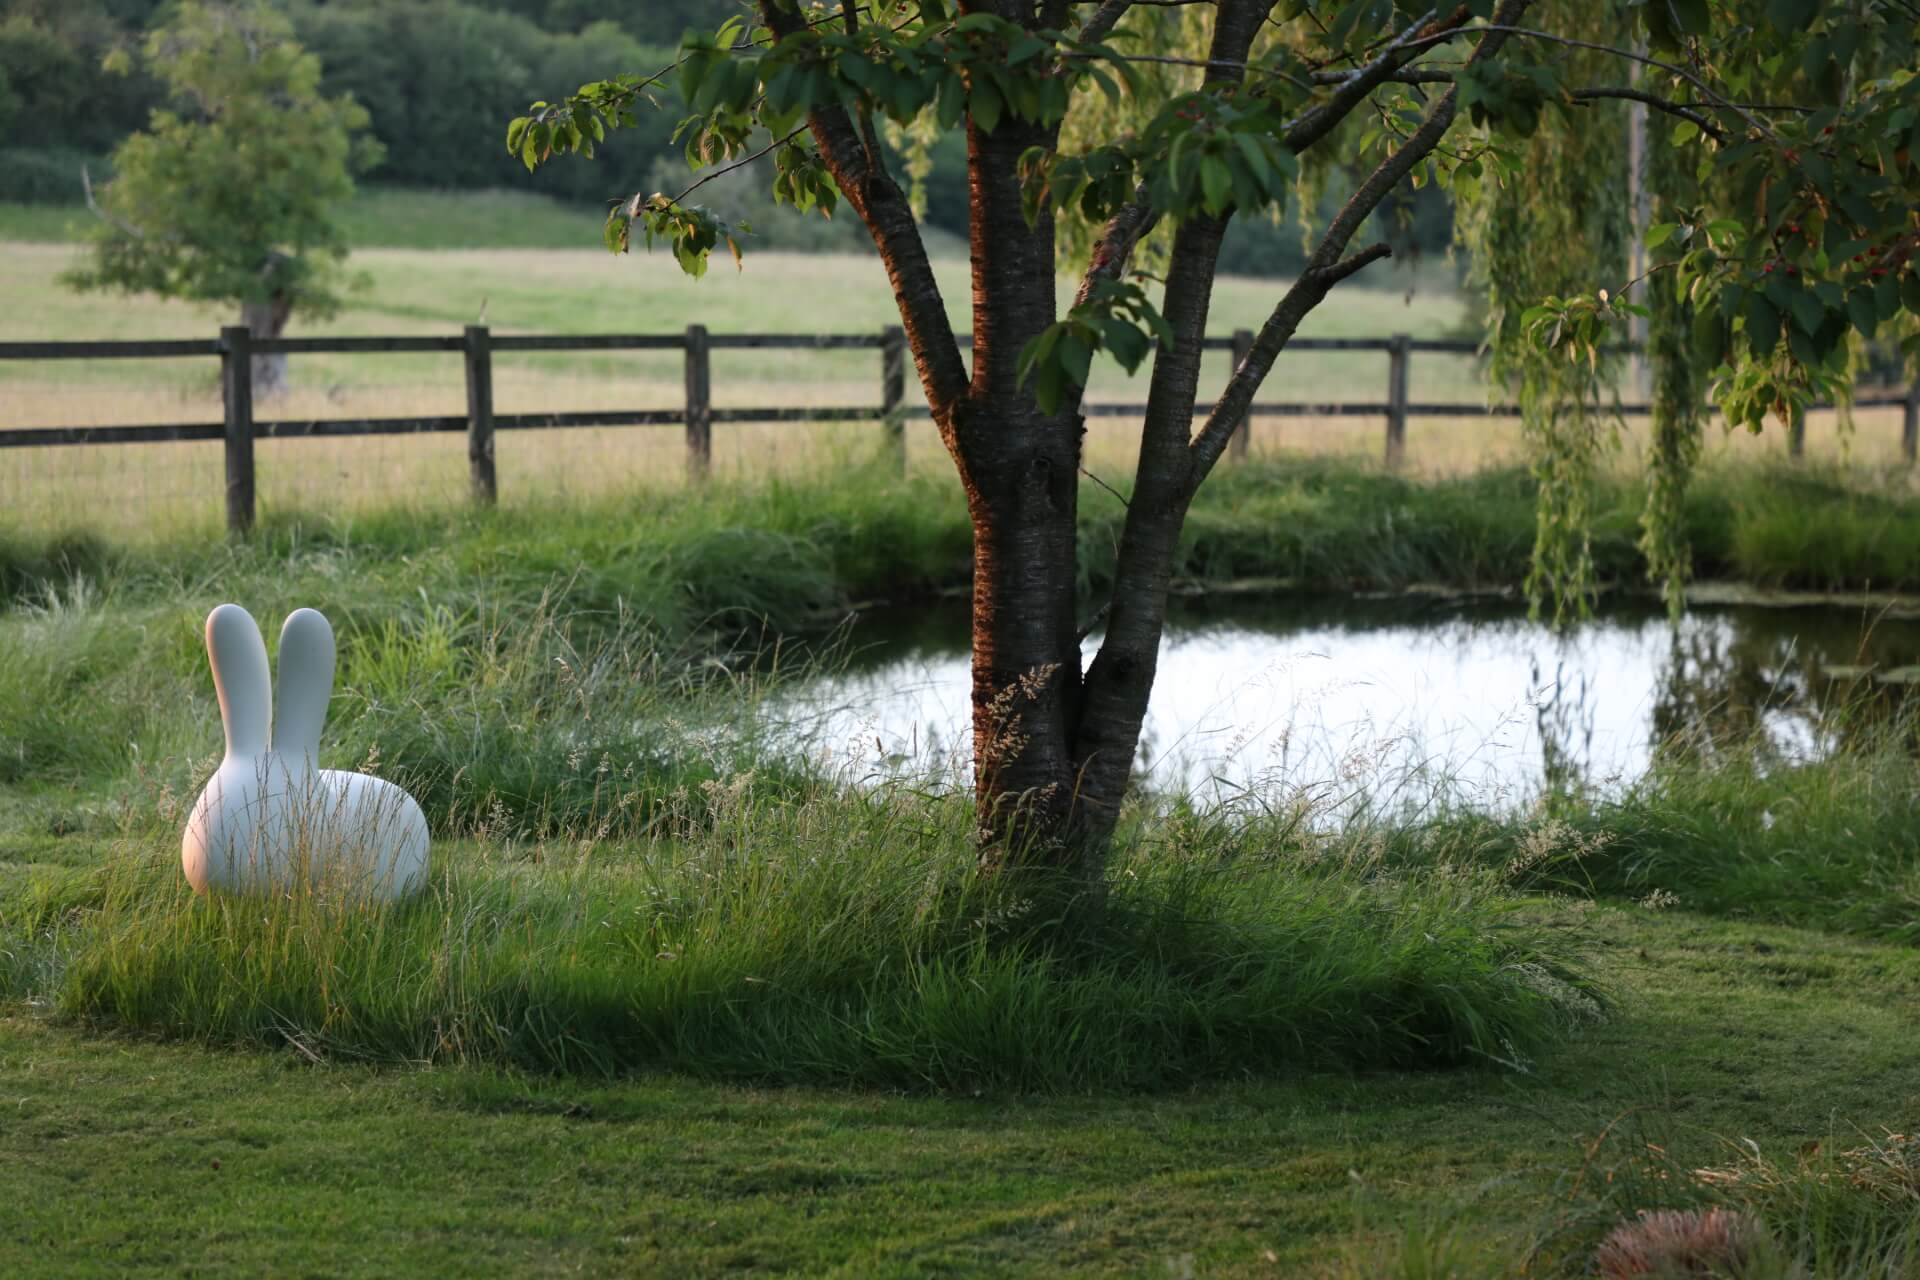 wildlife pond in a rural setting with a white rabbit sculpture